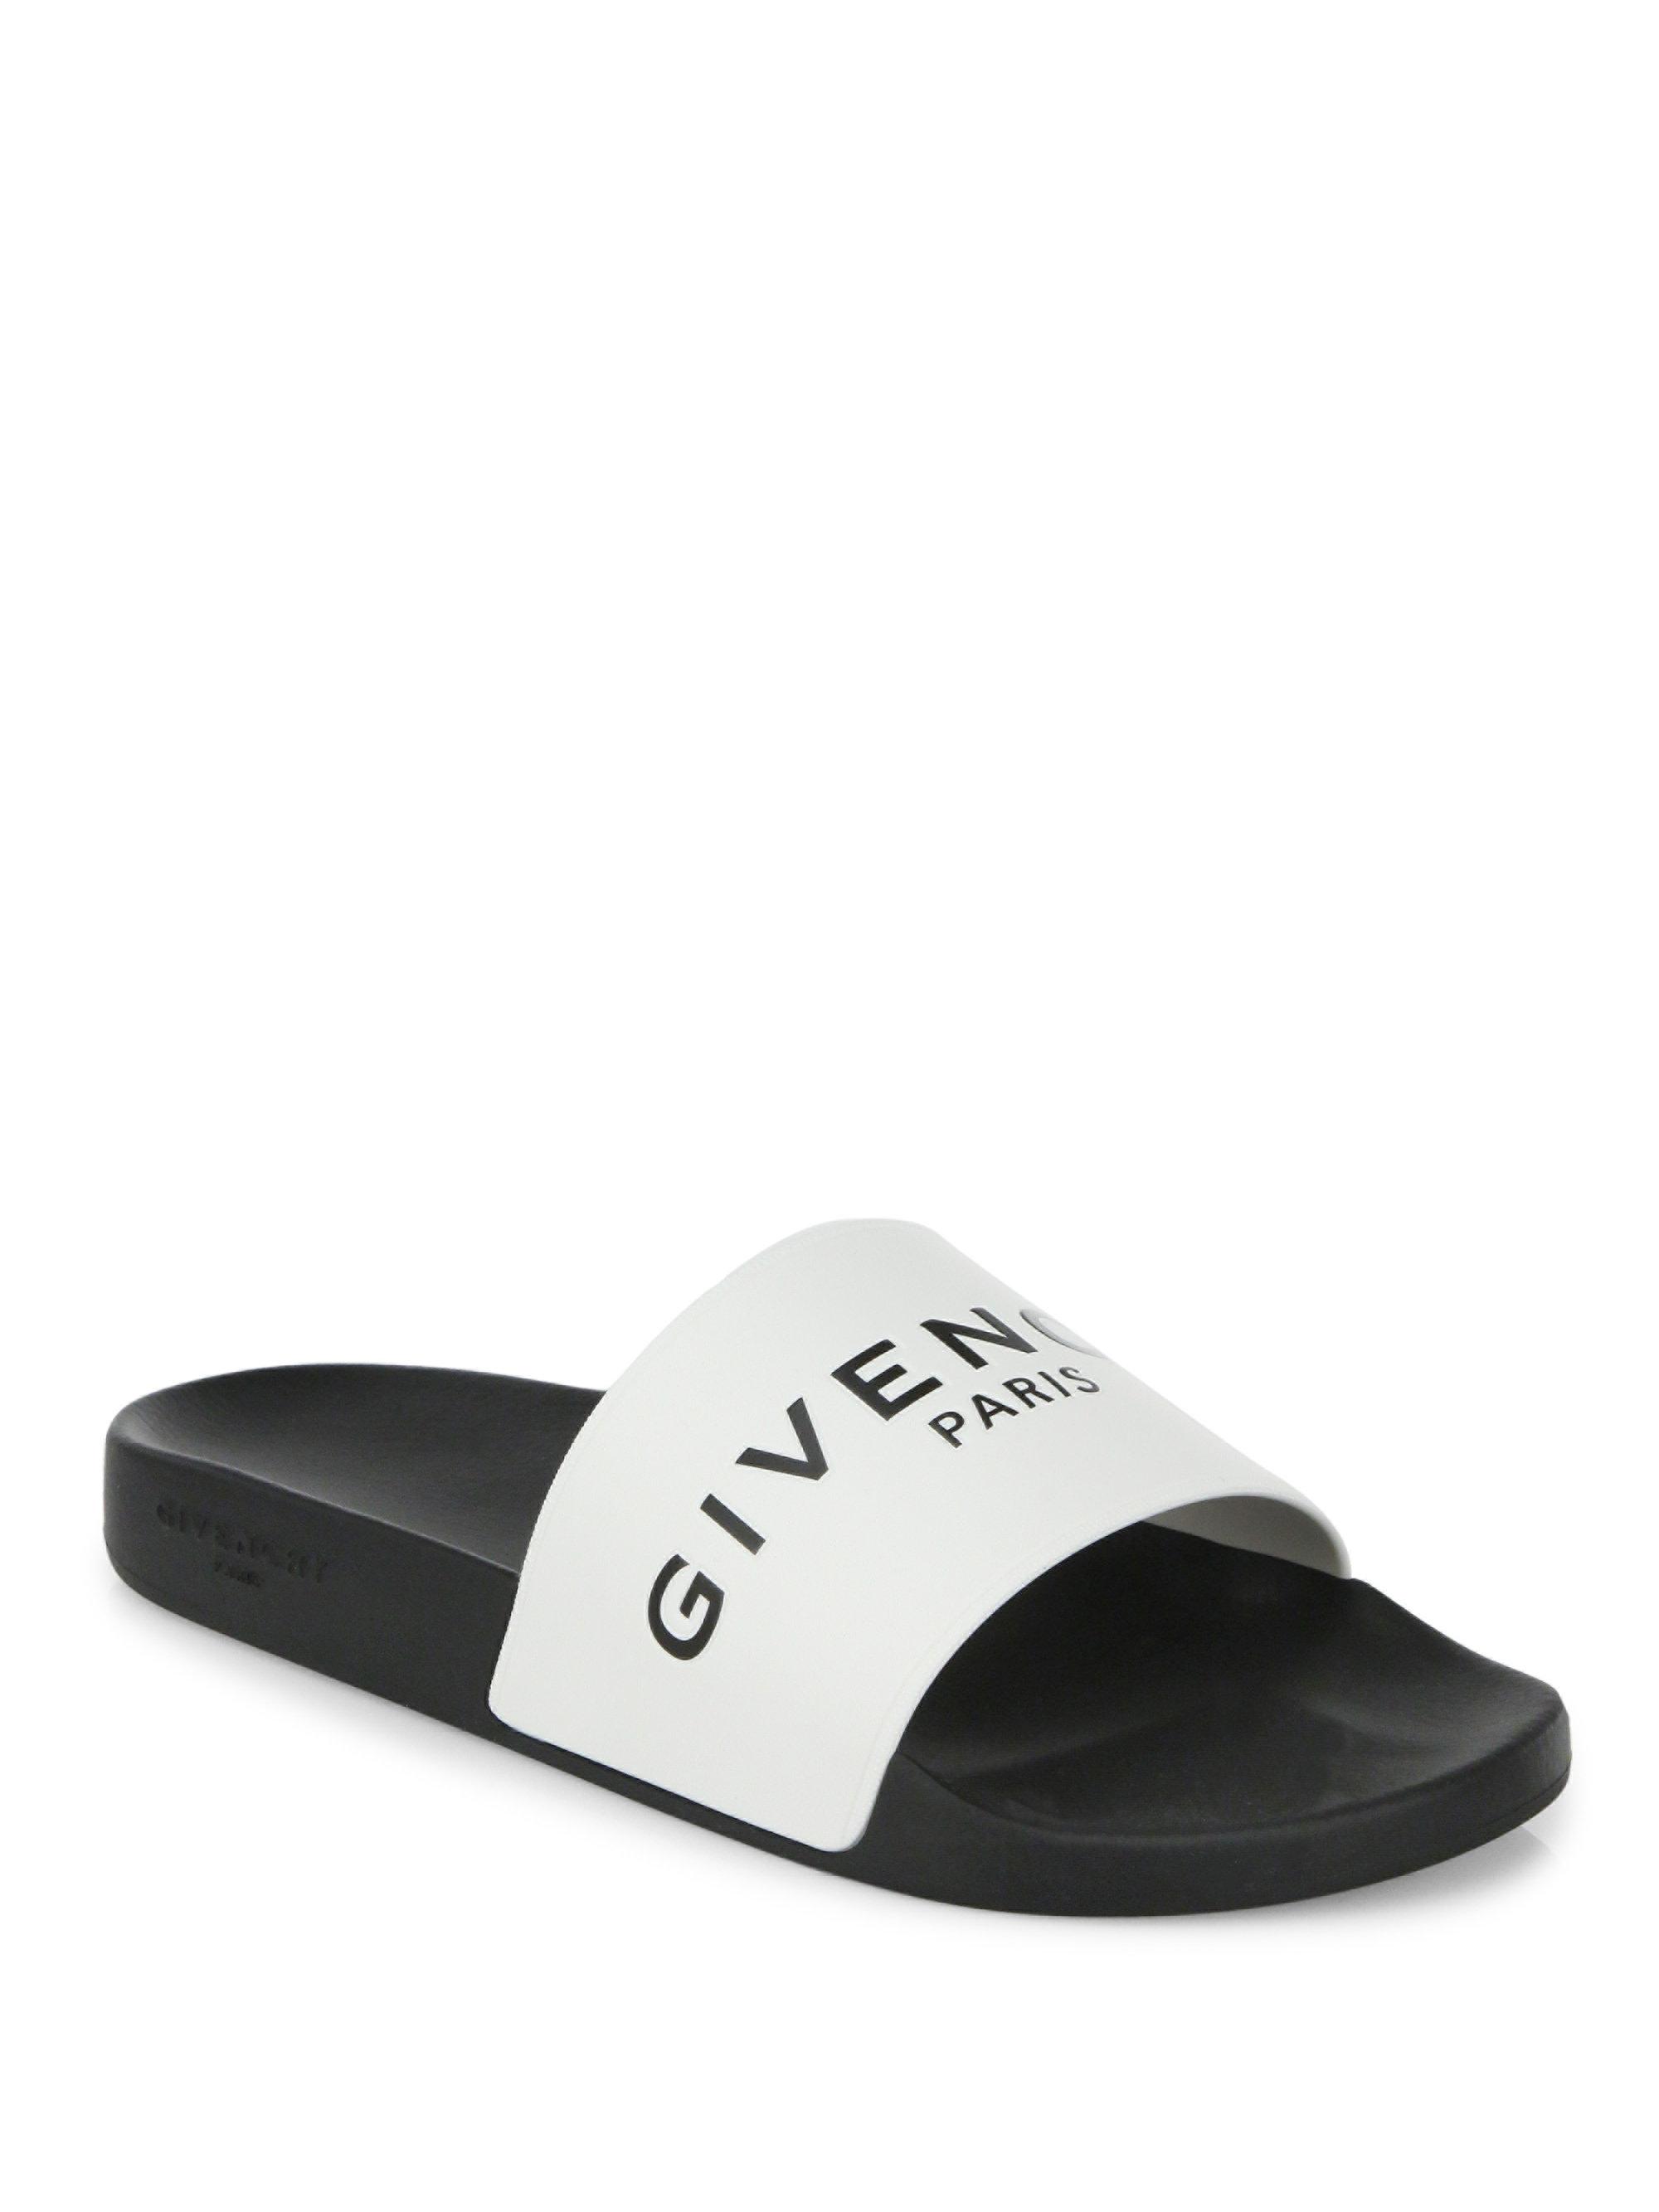 pink givenchy sliders